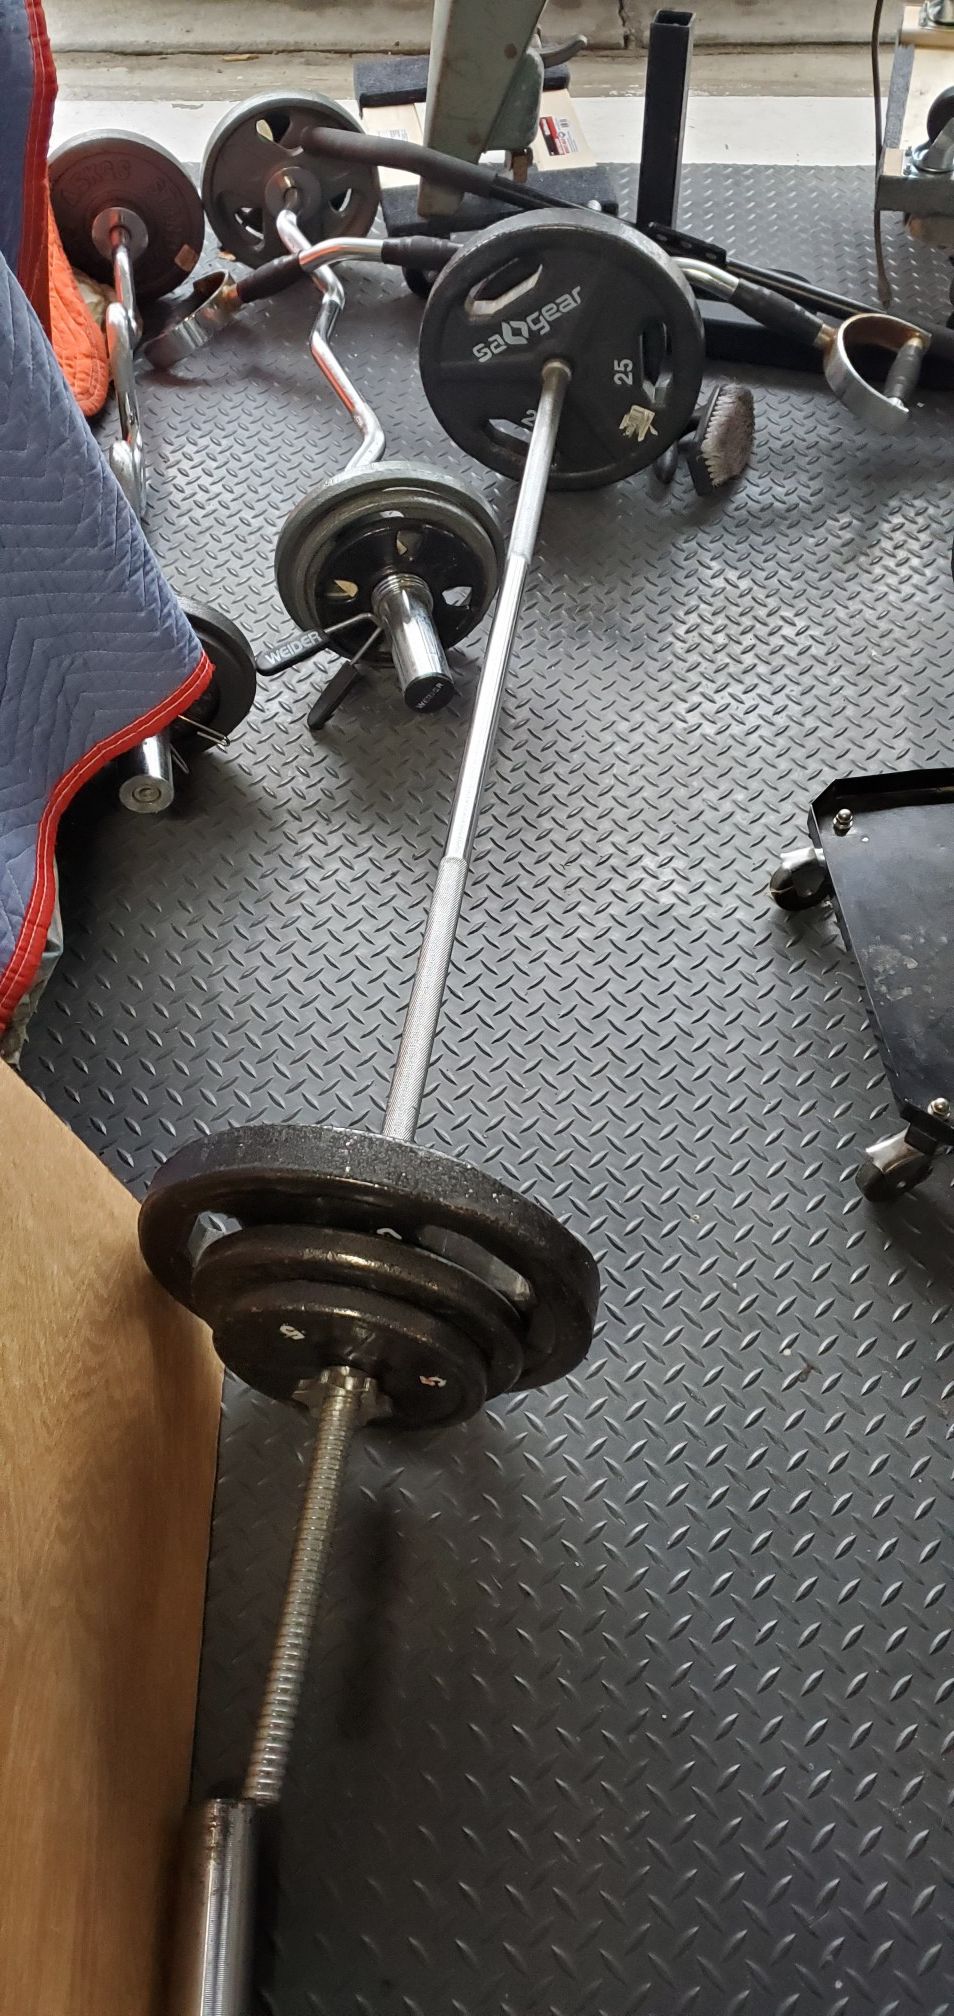 Standard bar and 80#s of weight